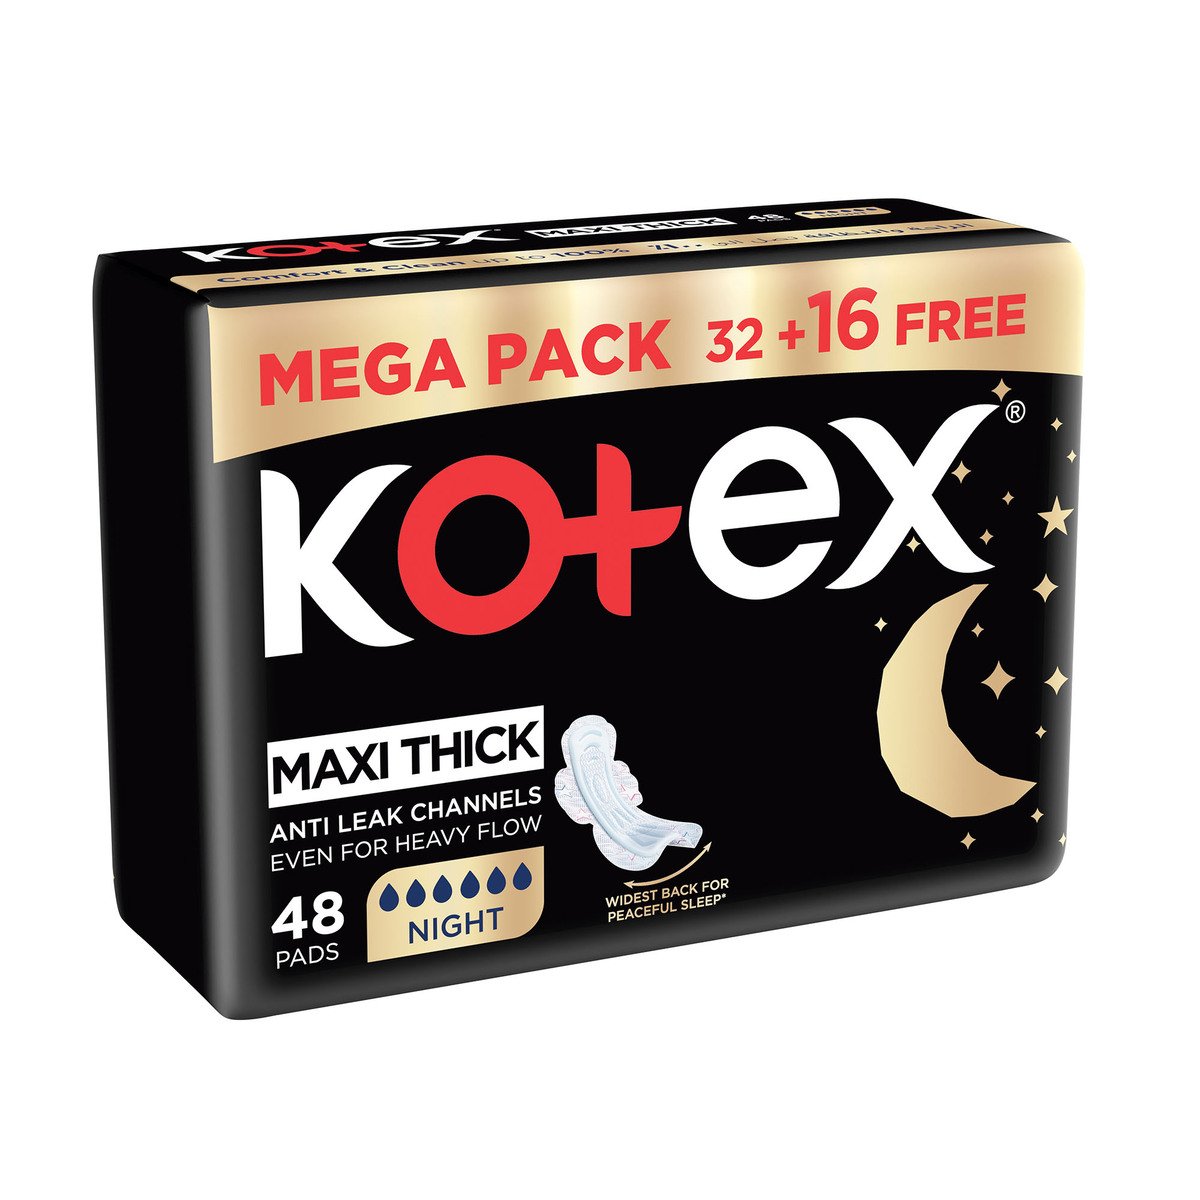 Kotex Maxi Thick Night Sanitary Pads With Wings 32+16